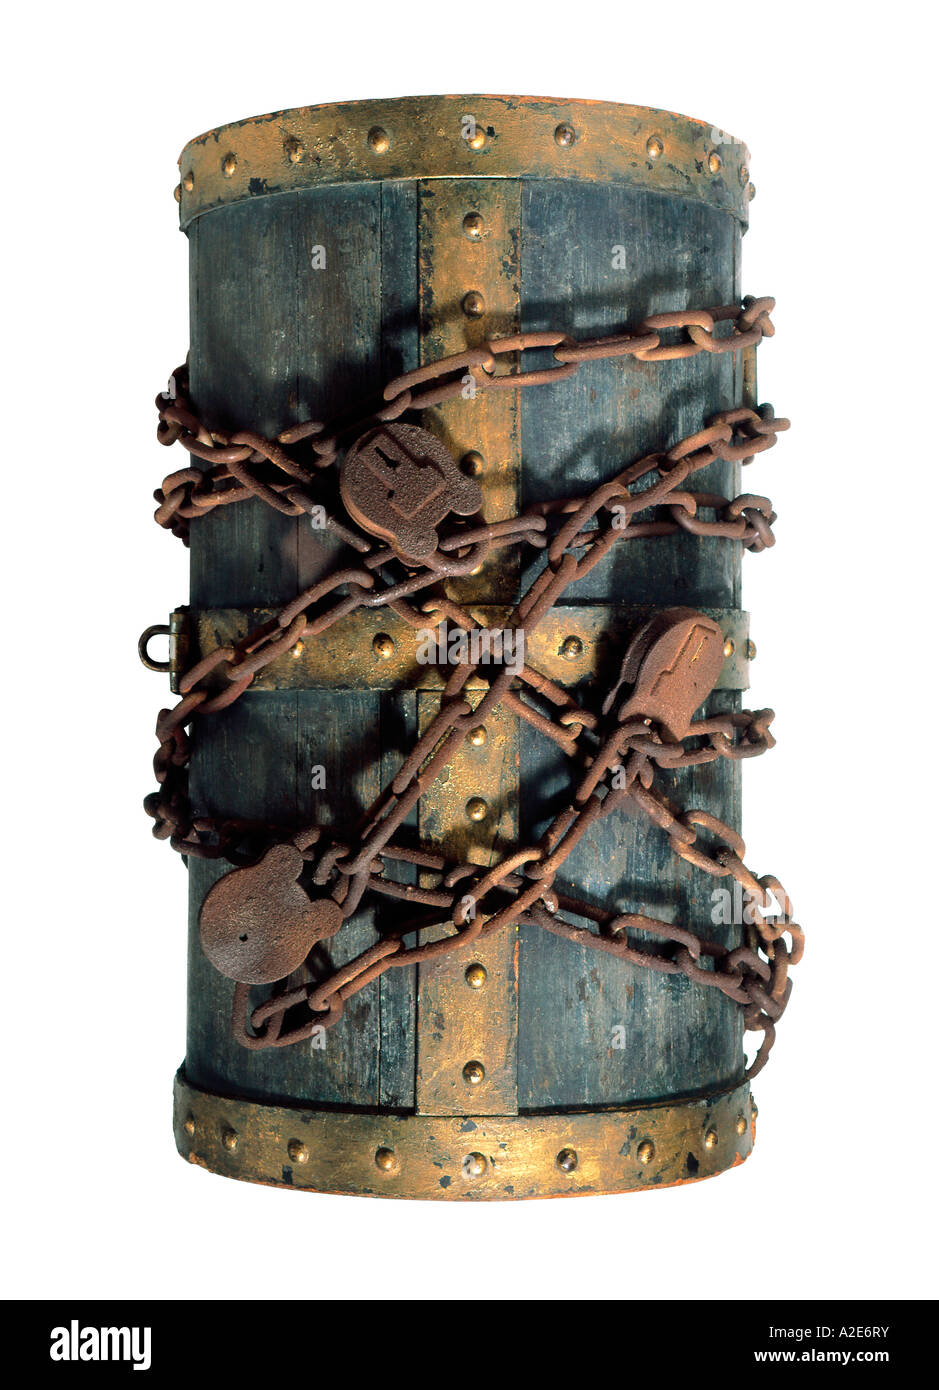 Treasure chest secured with rusty chains and padlocks on a white backgrounds. Studio image. Stock Photo